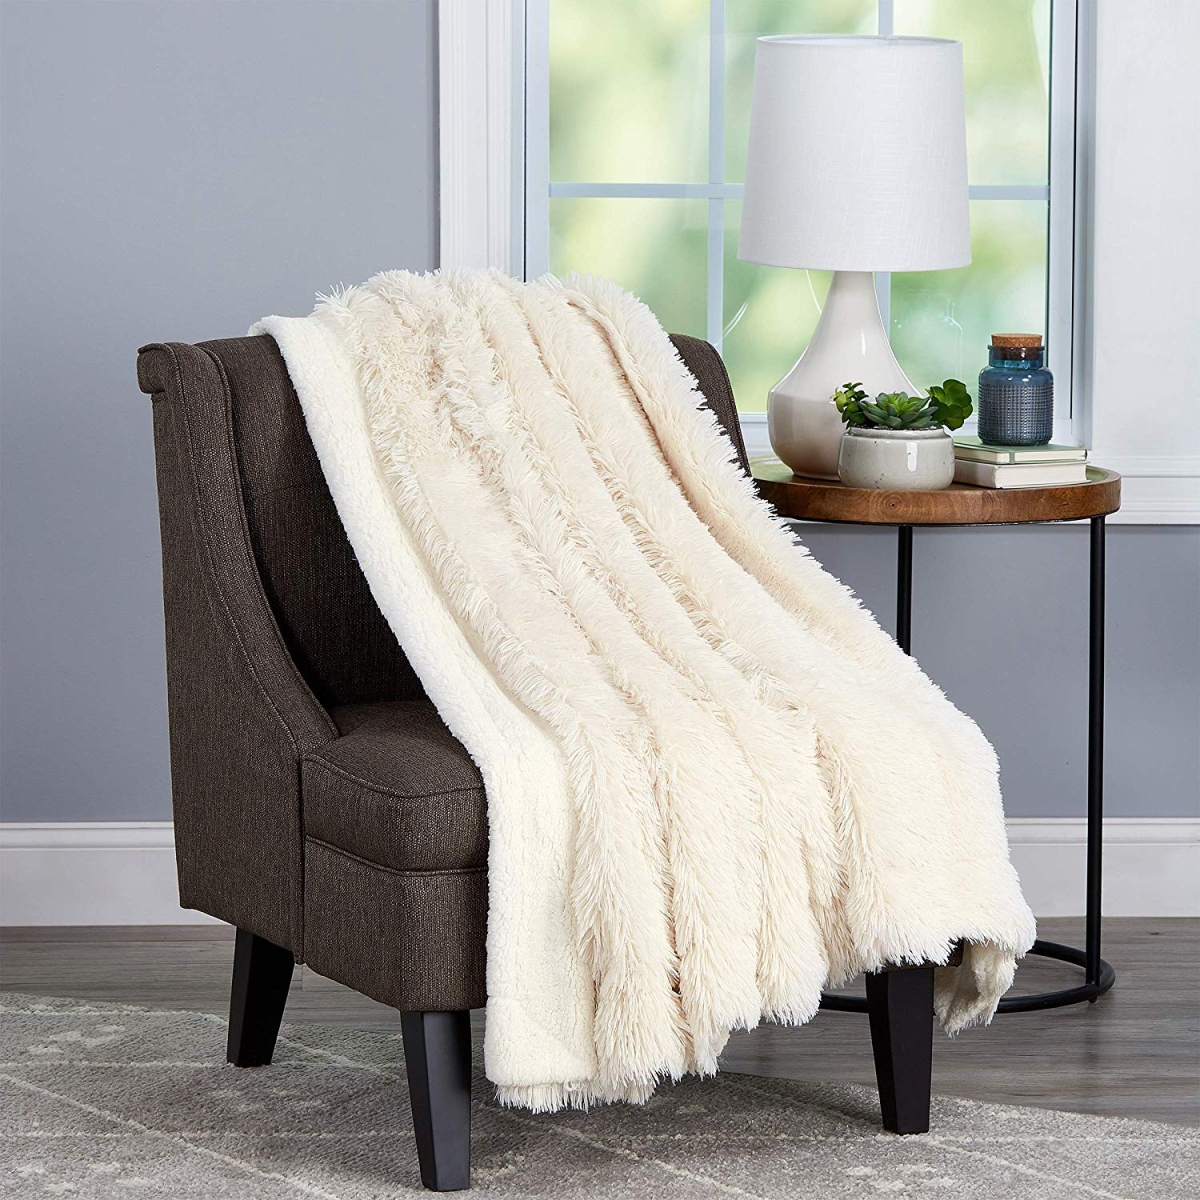 66a-34984 Soft Hypoallergenic Long Pile Faux Rabbit Fur Blanket With Sherpa Back For Couch Throw Luxurious, 60 X 70 In. - White